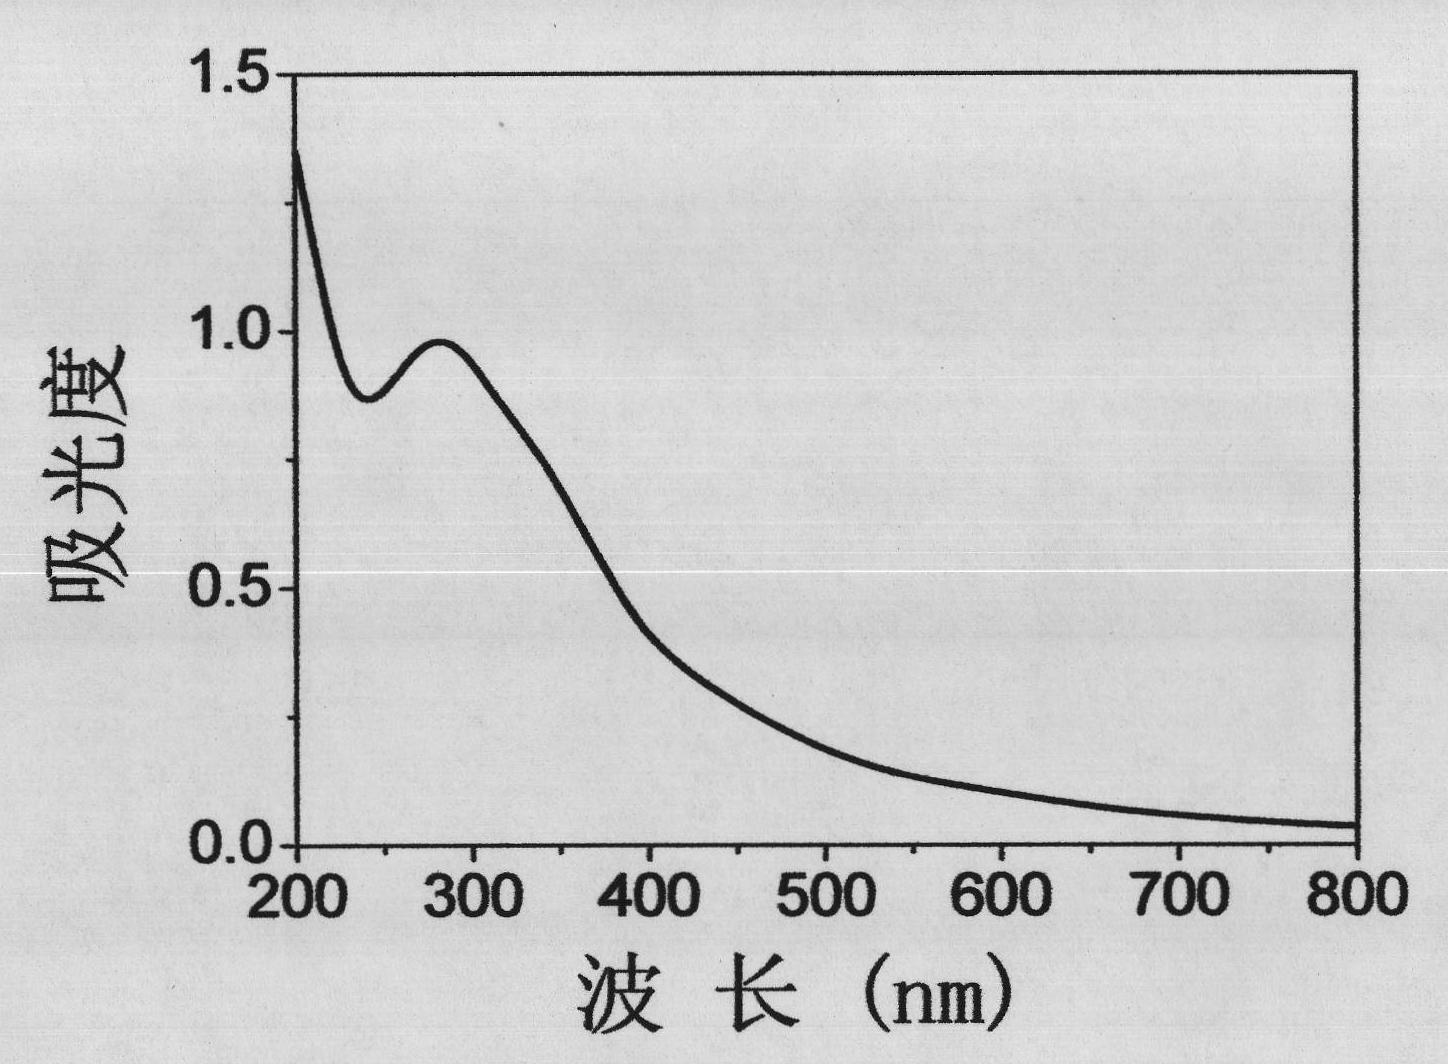 Nano copper oxide analogue enzyme and method for measuring hydrogen peroxide by using nano copper oxide analogue enzyme as peroxide analogue enzyme